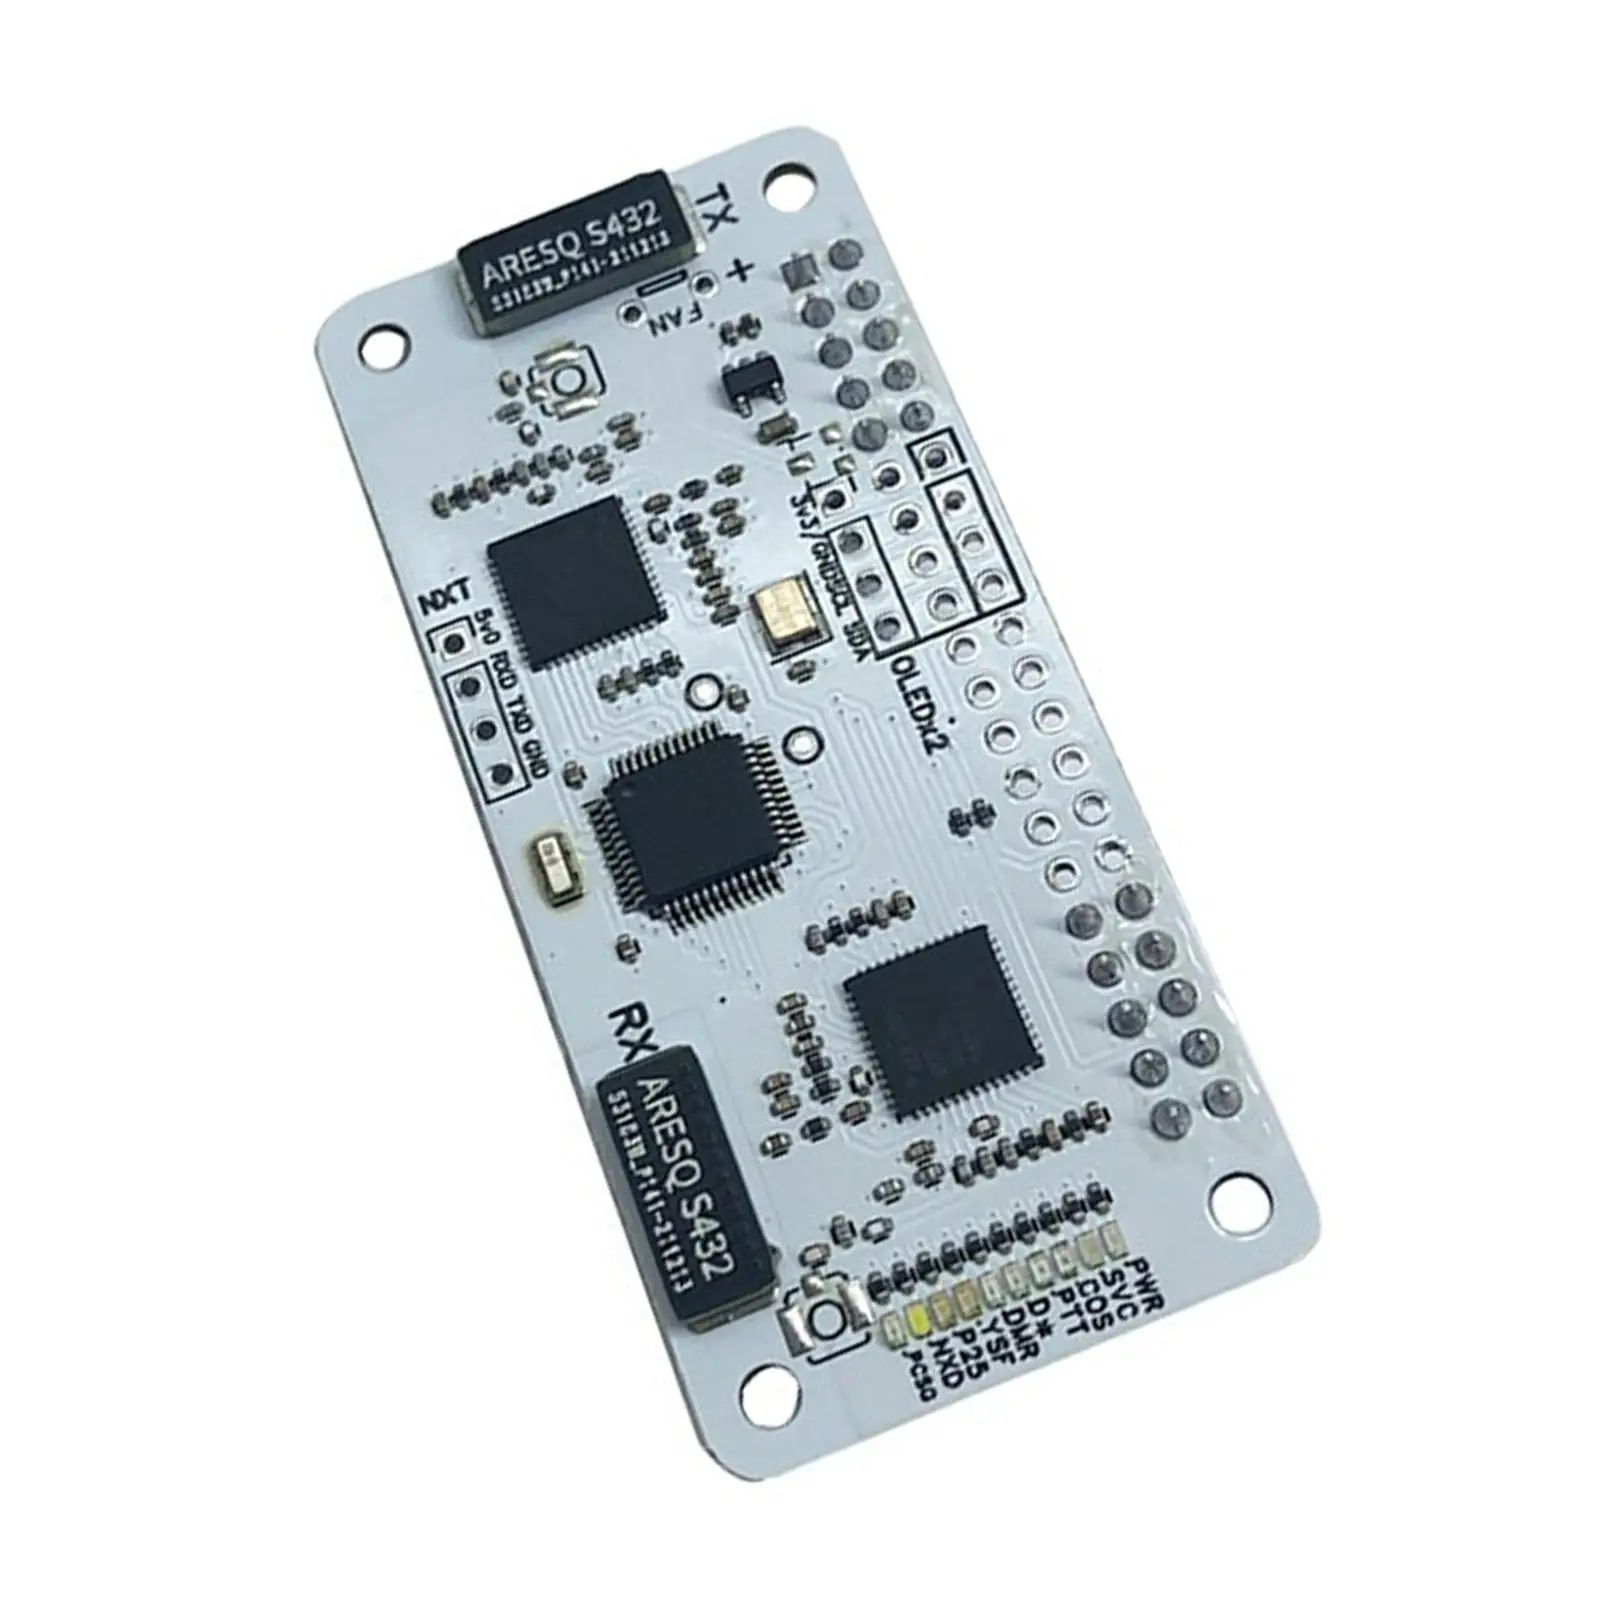 Two Modes Point Board Replacement ,High accessories, Easy to Install Metal hotspots Board Kit Access, for P25 DMR Ysf softwares